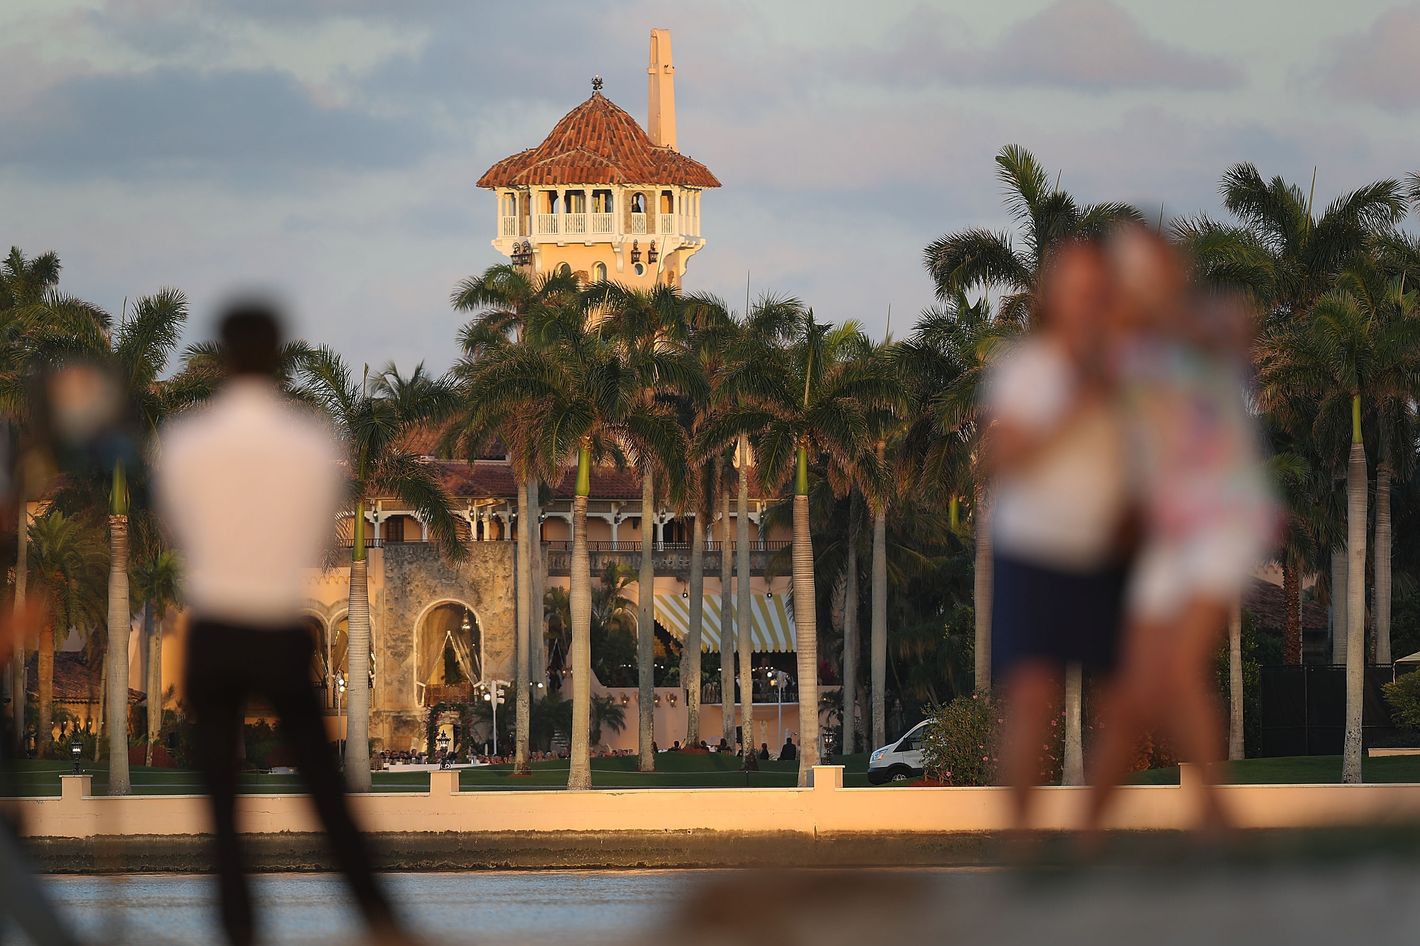 Charities Are Pulling Their Events From Trump’s MaraLago